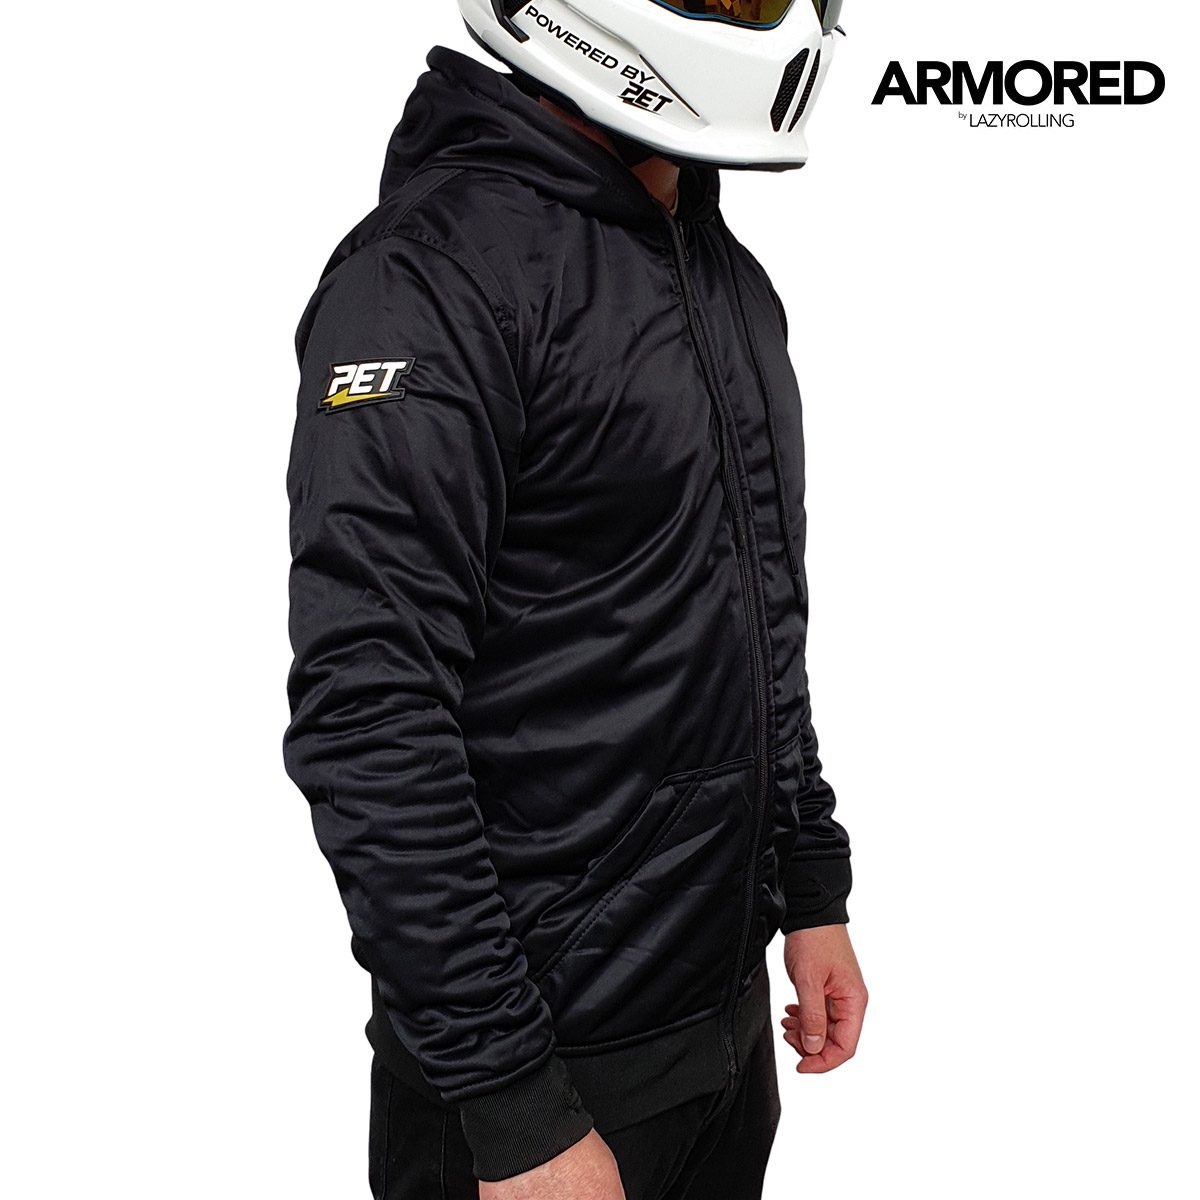 ARMORED x PET Performance Hoodie by Lazyrolling